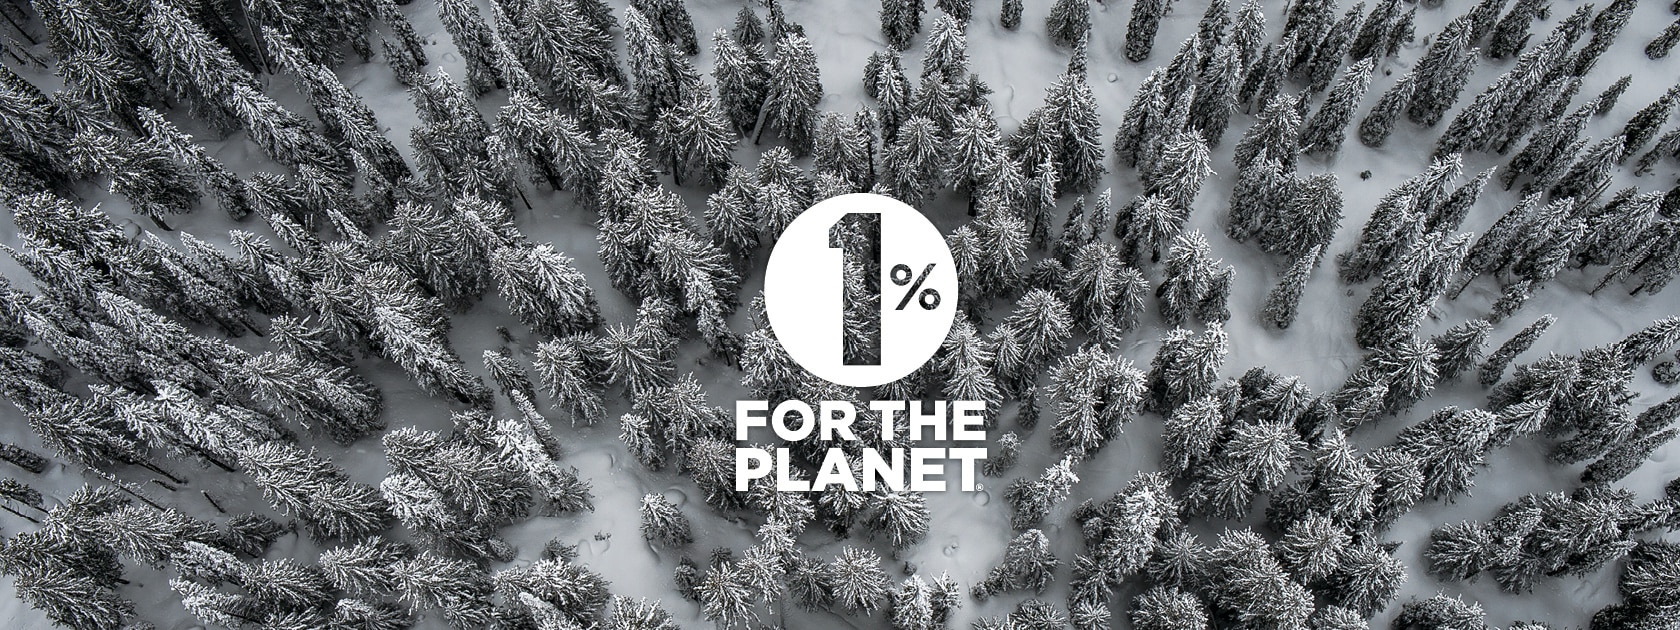 aerial view of snowy pine trees with 1% logo in the center